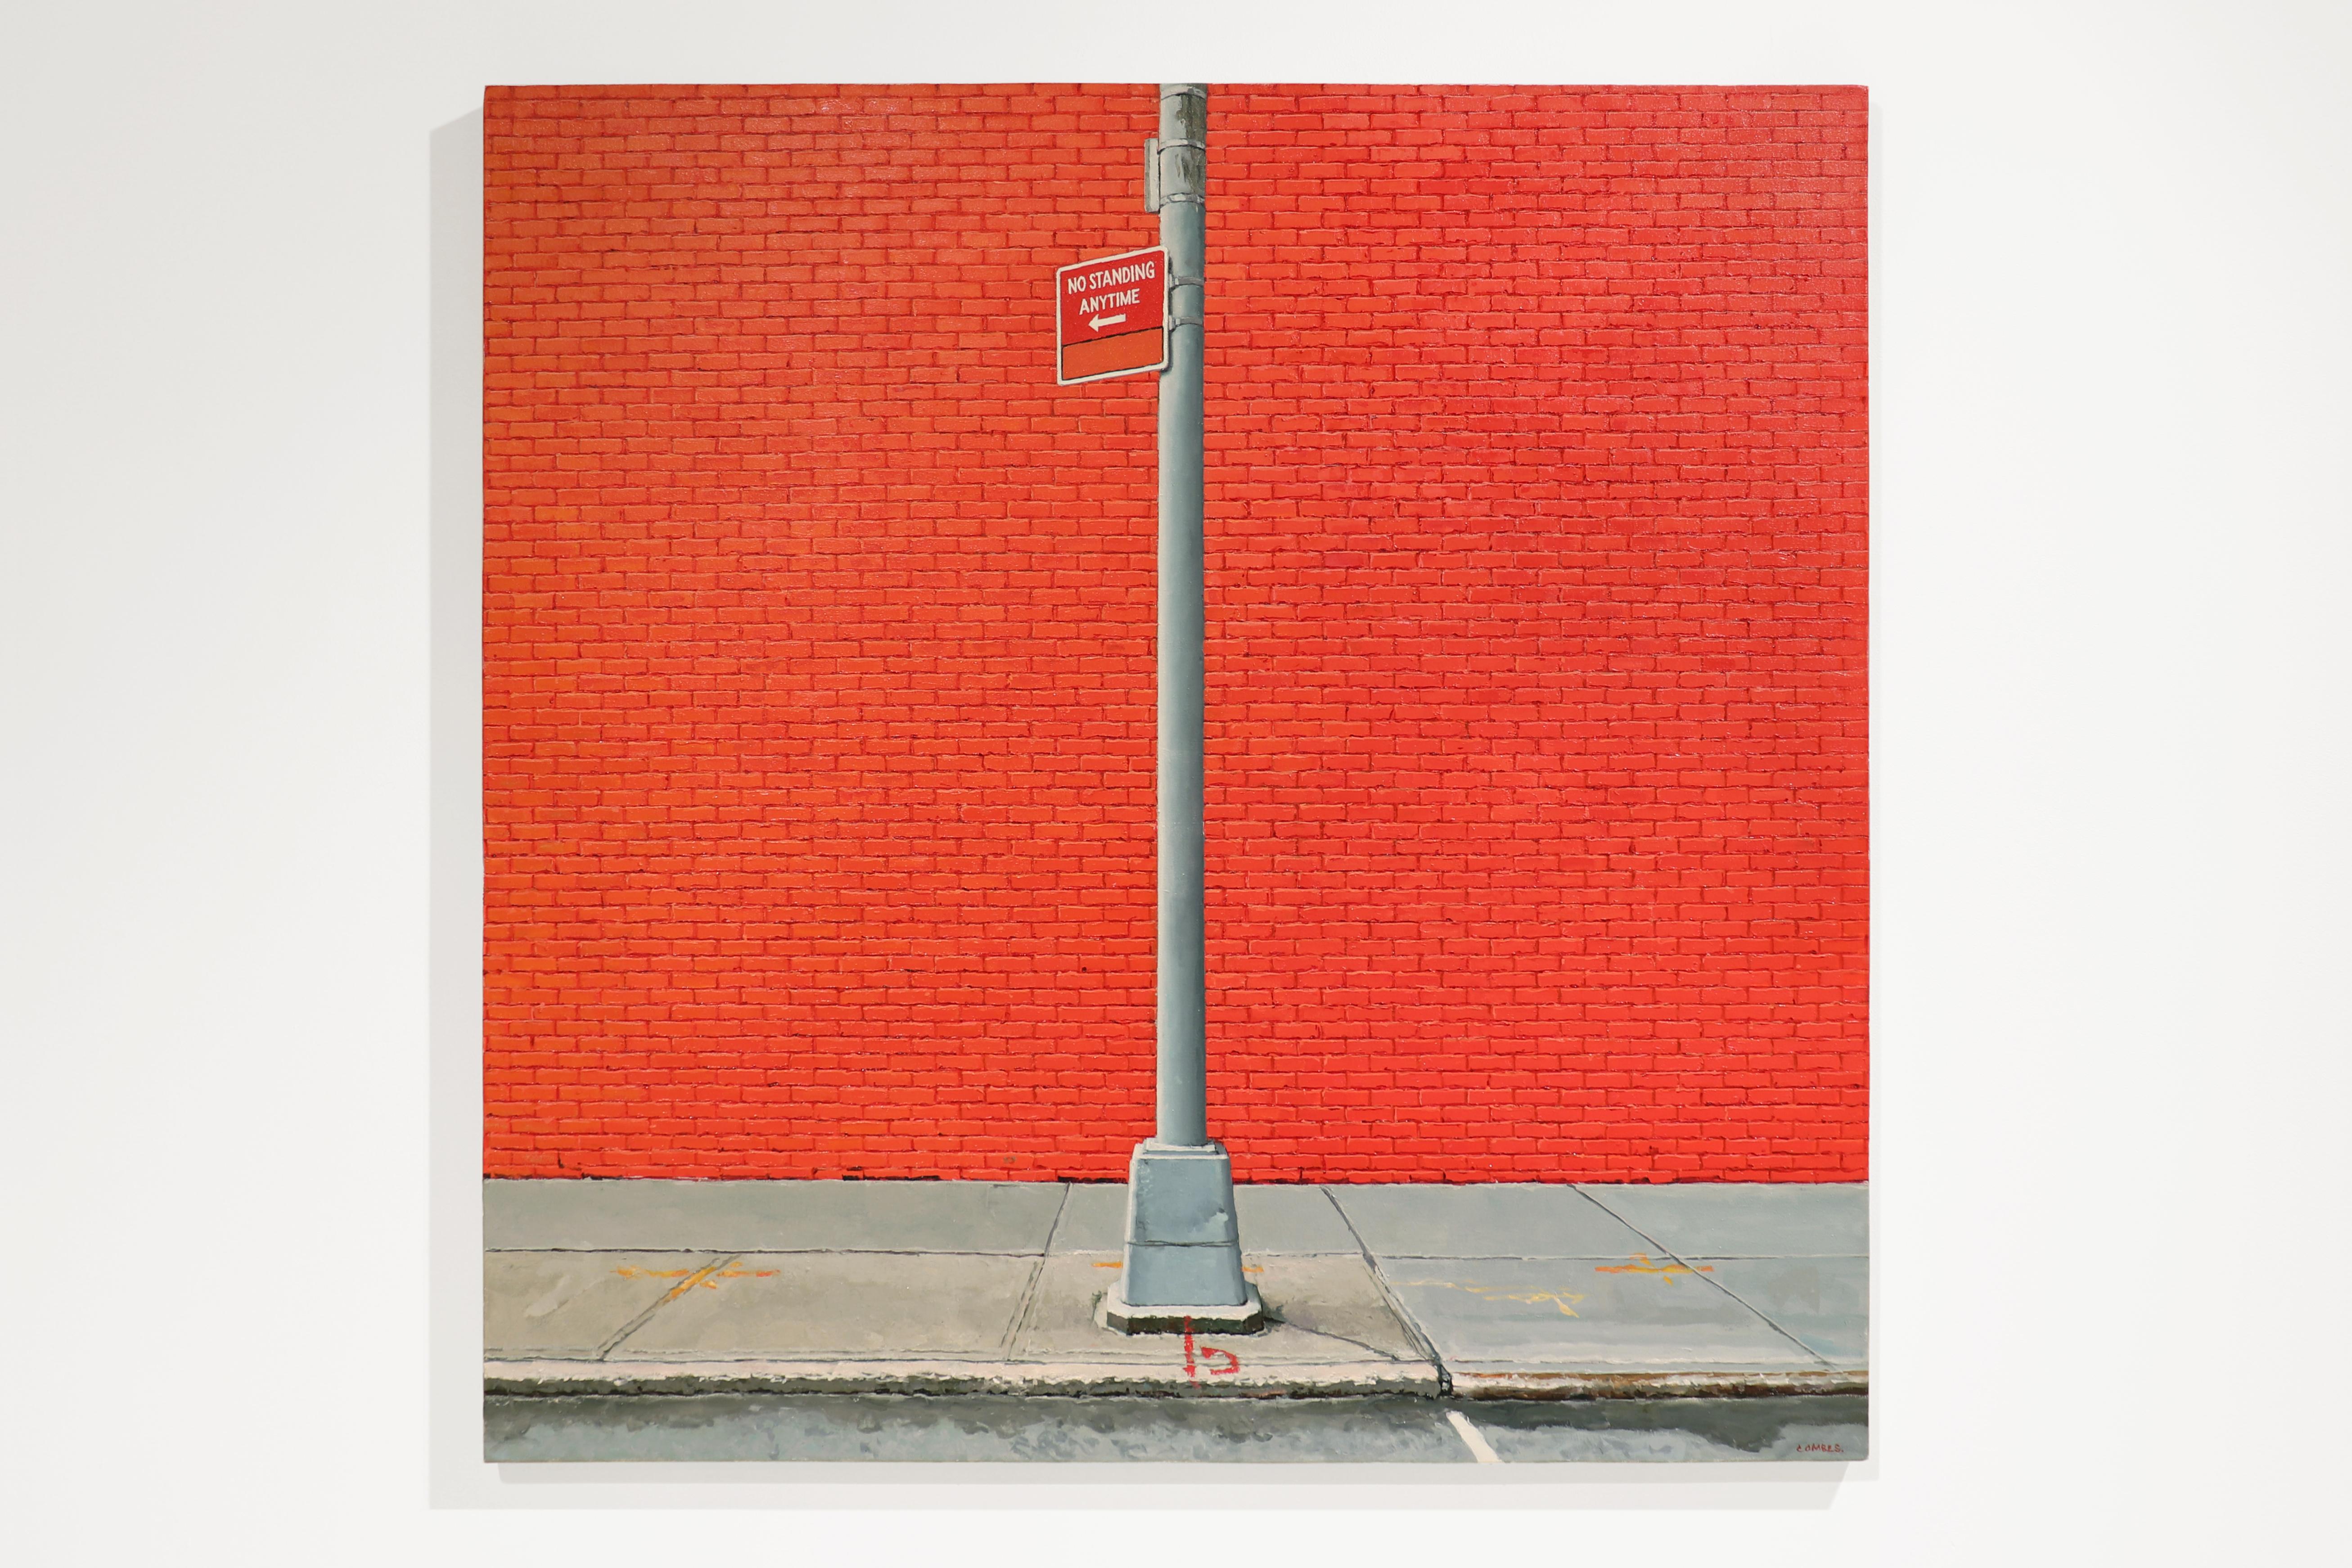 DUMBO WALL - Contemporary Realism / City Architecture / Brooklyn / Red - Painting by Richard Combes